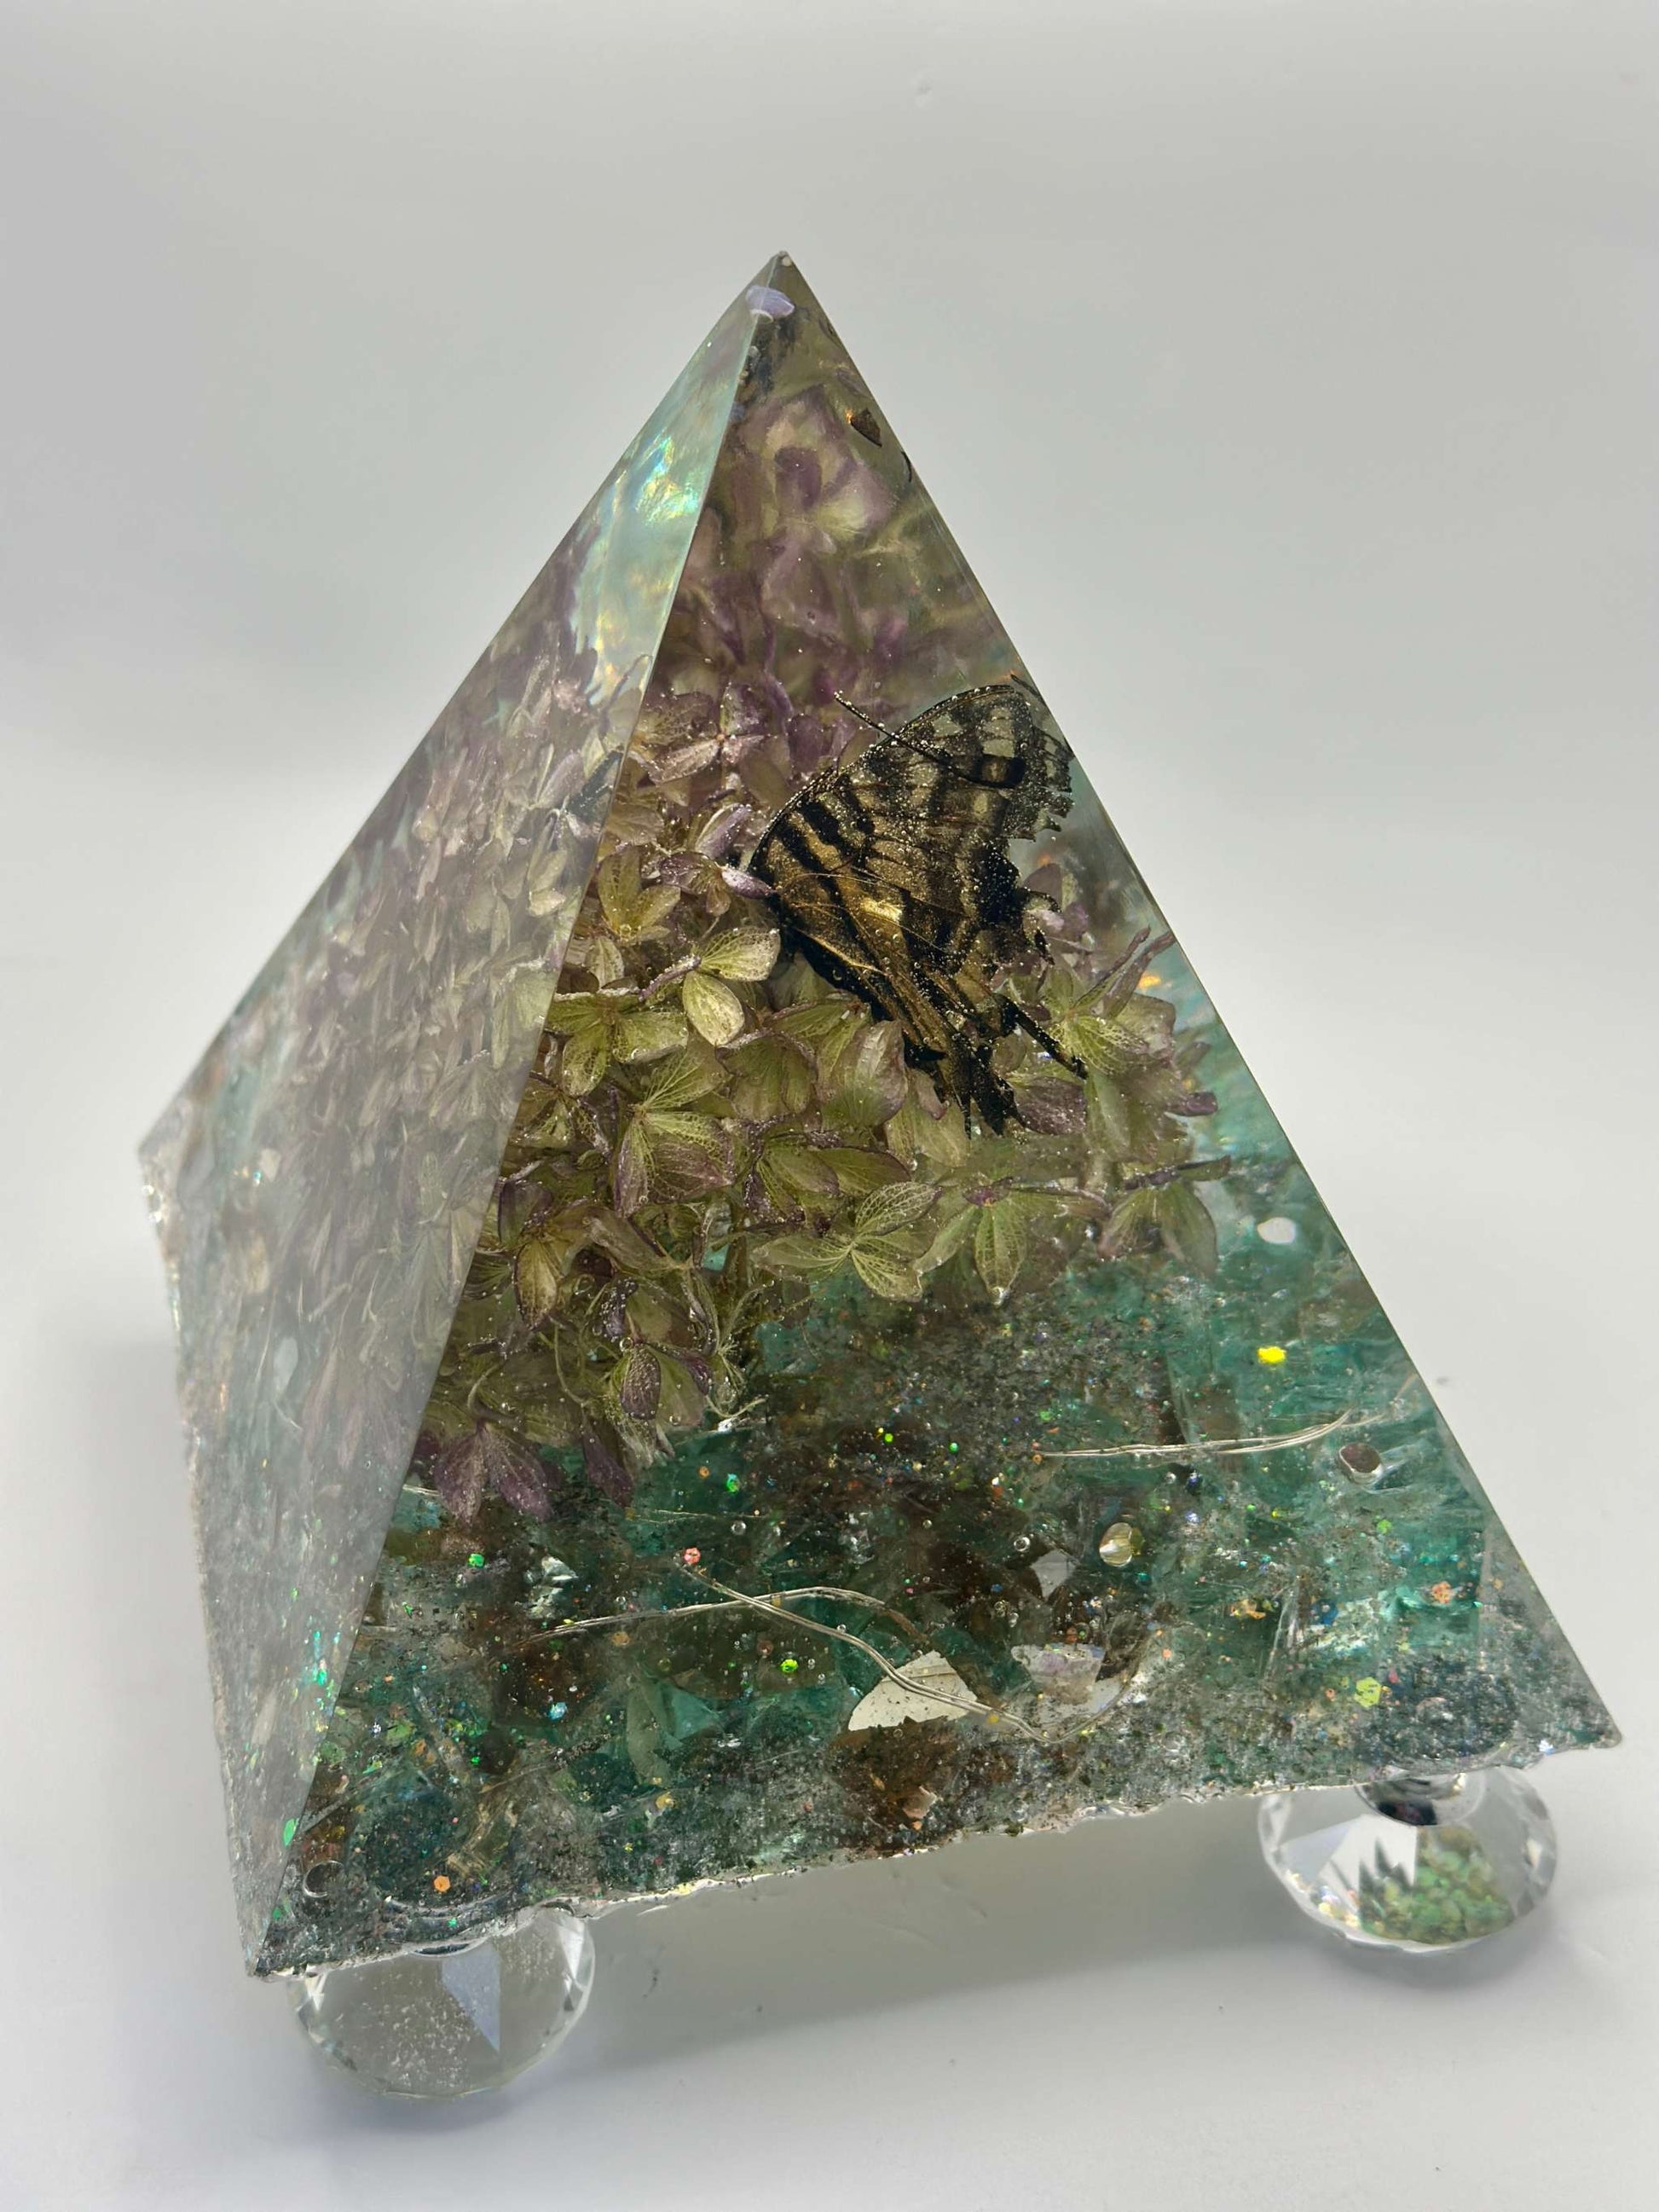 Butterfly Handmade Home Decor Epoxy Resin Pyramid Lighted Sculpture